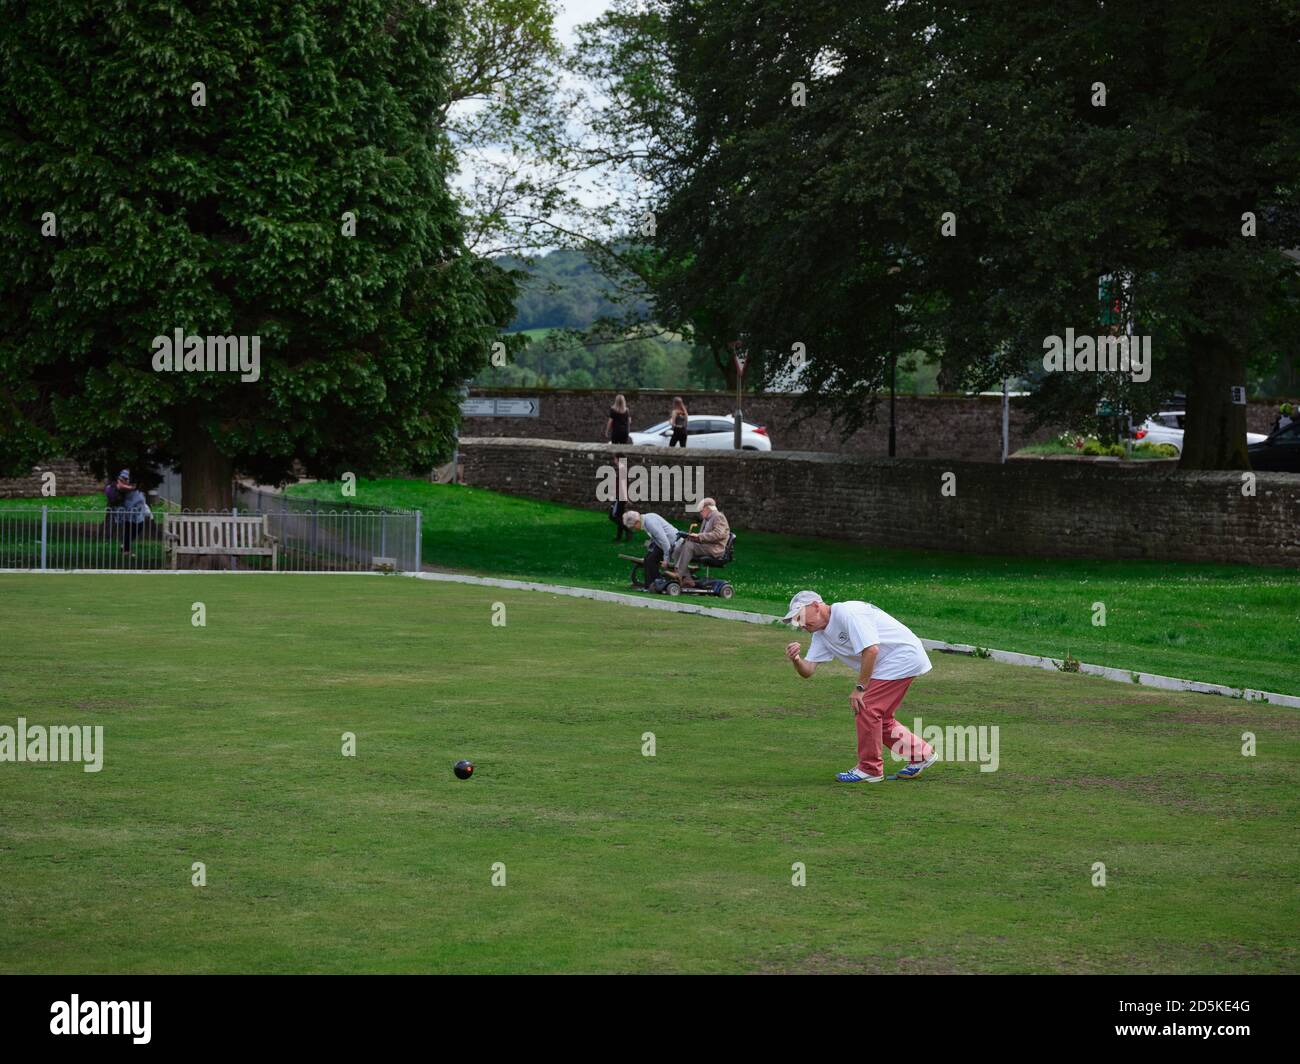 In July, a lone competitor takes time to practice bowls on the crown green at Pateley Bridge, Harrogate, North Yorkshire, England, UK. 21/07/2019. Stock Photo